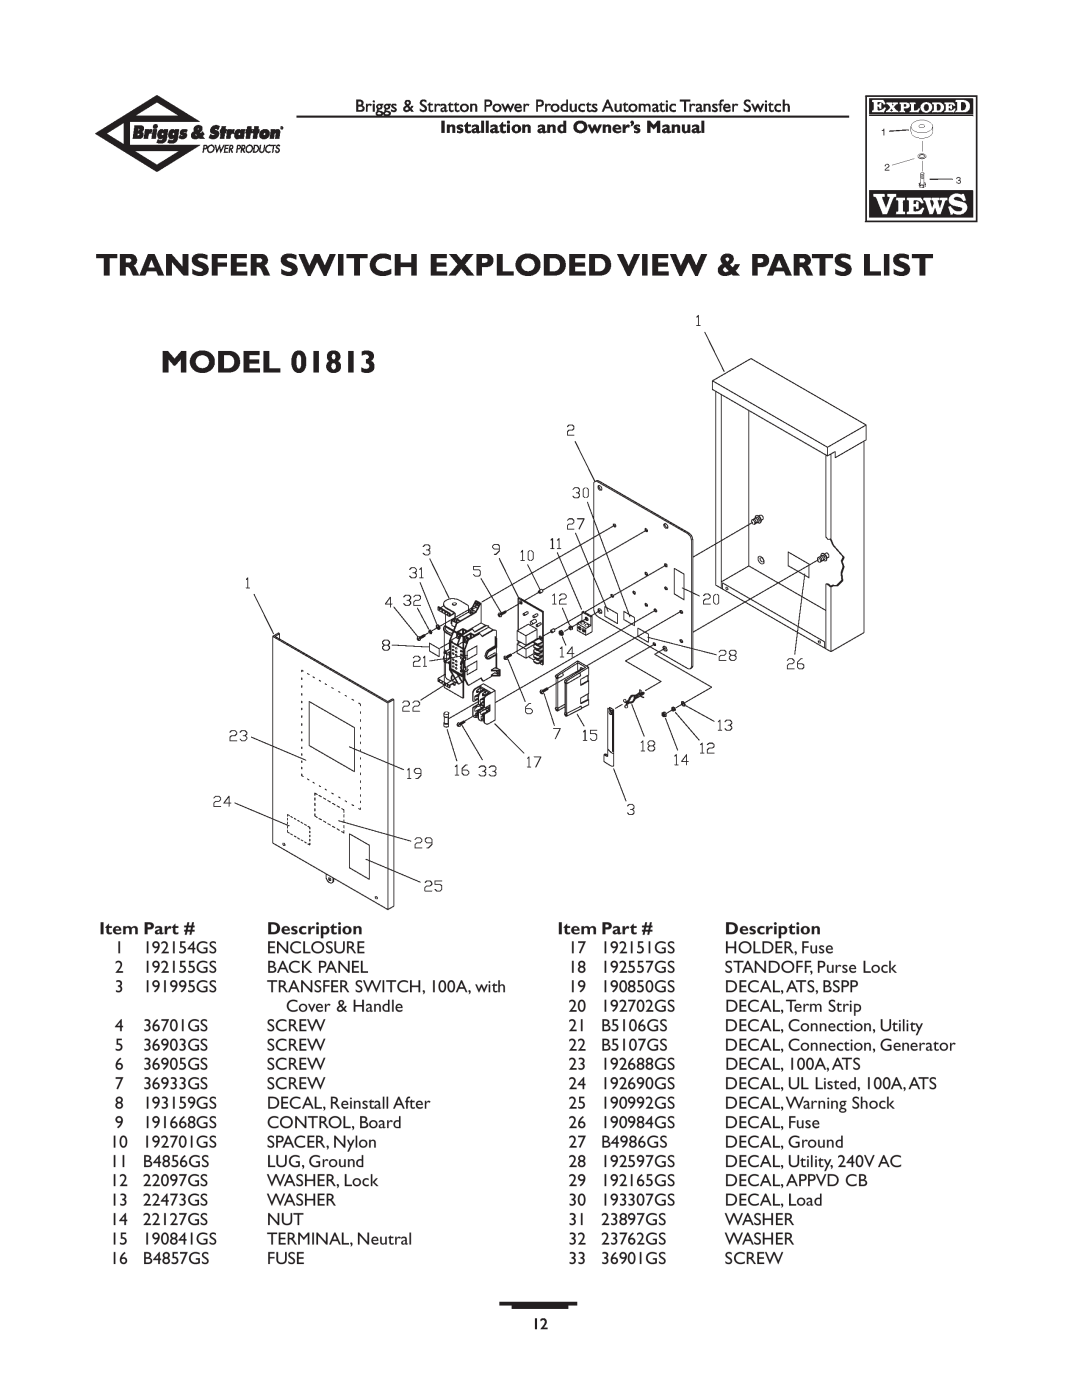 Briggs & Stratton 01814-0 Transfer Switch Exploded View & Parts List Model, Description, Installation and Owner’s Manual 